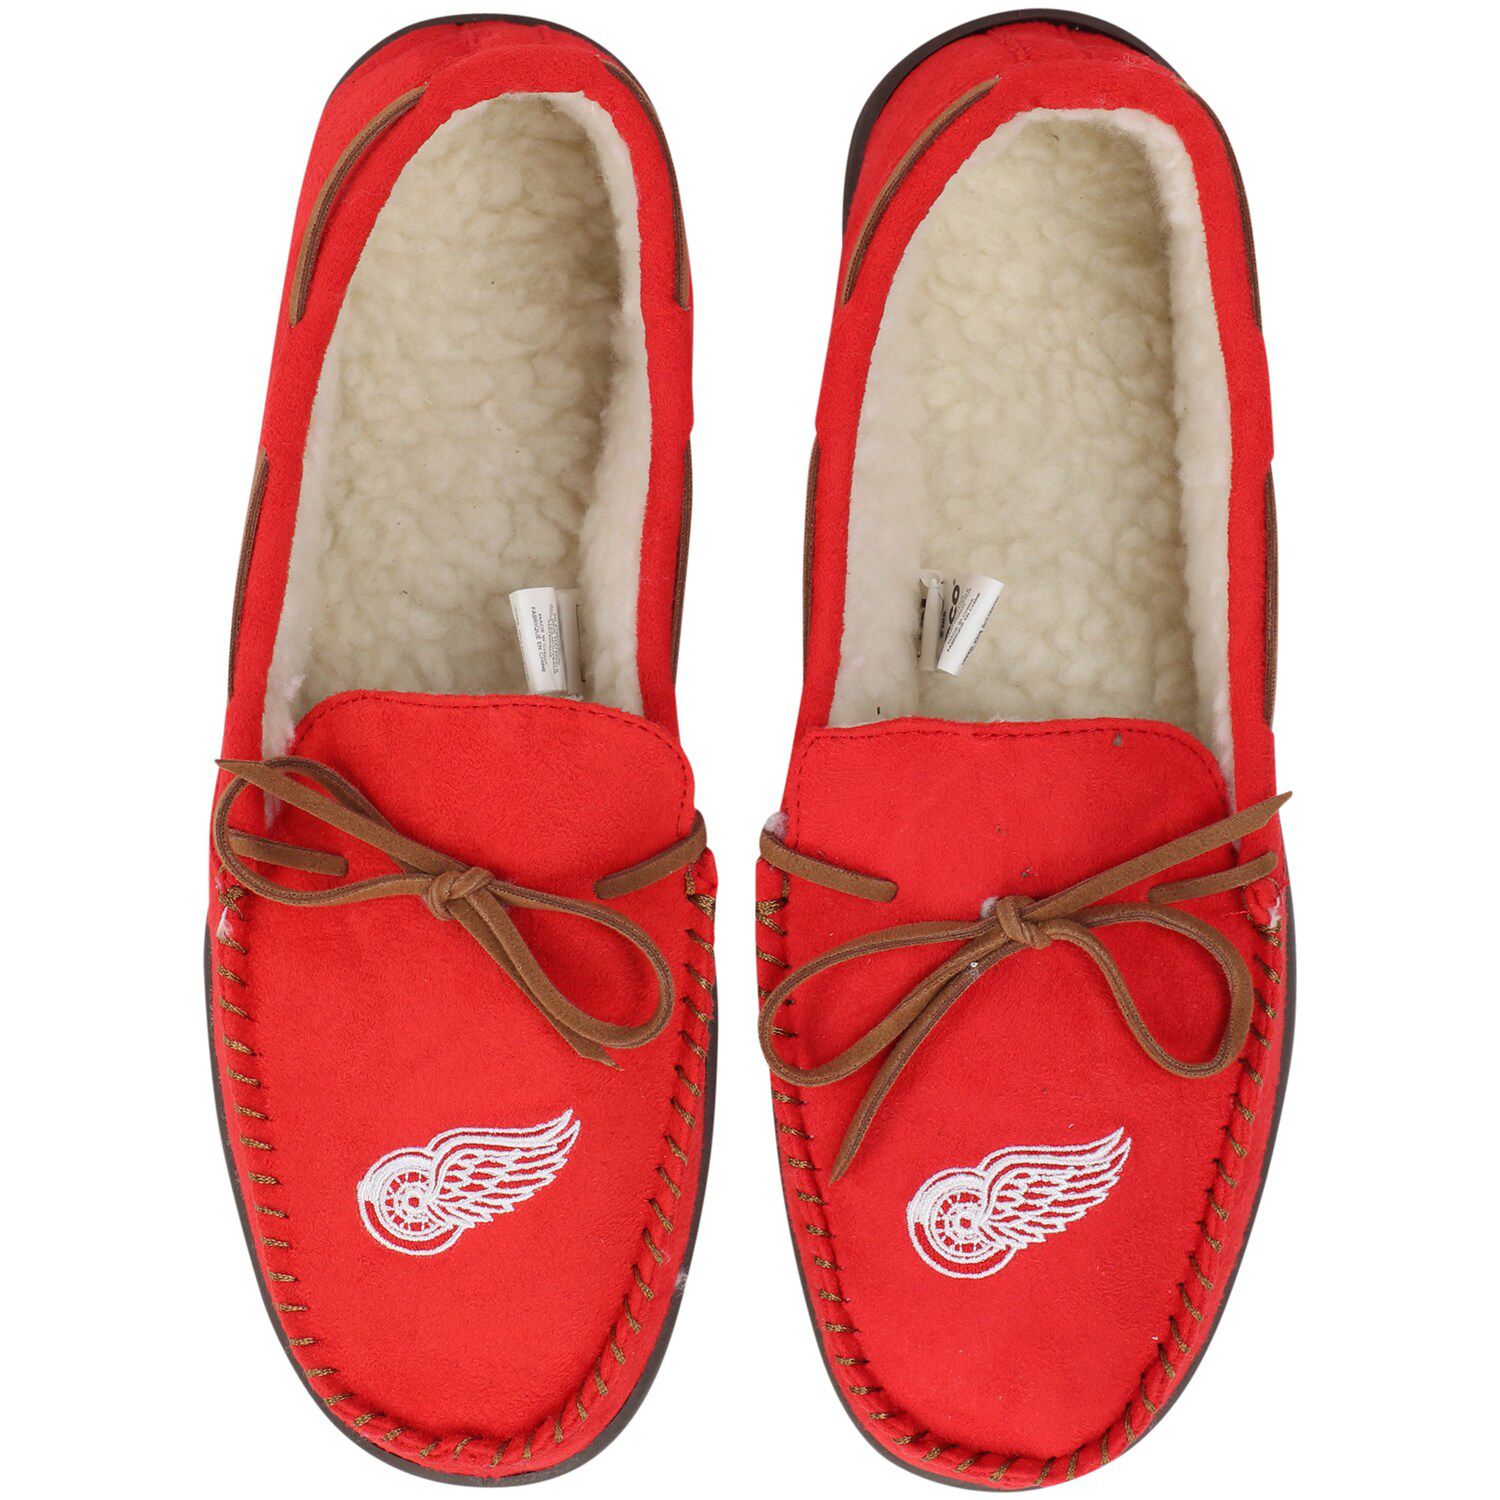 red wing slippers mens